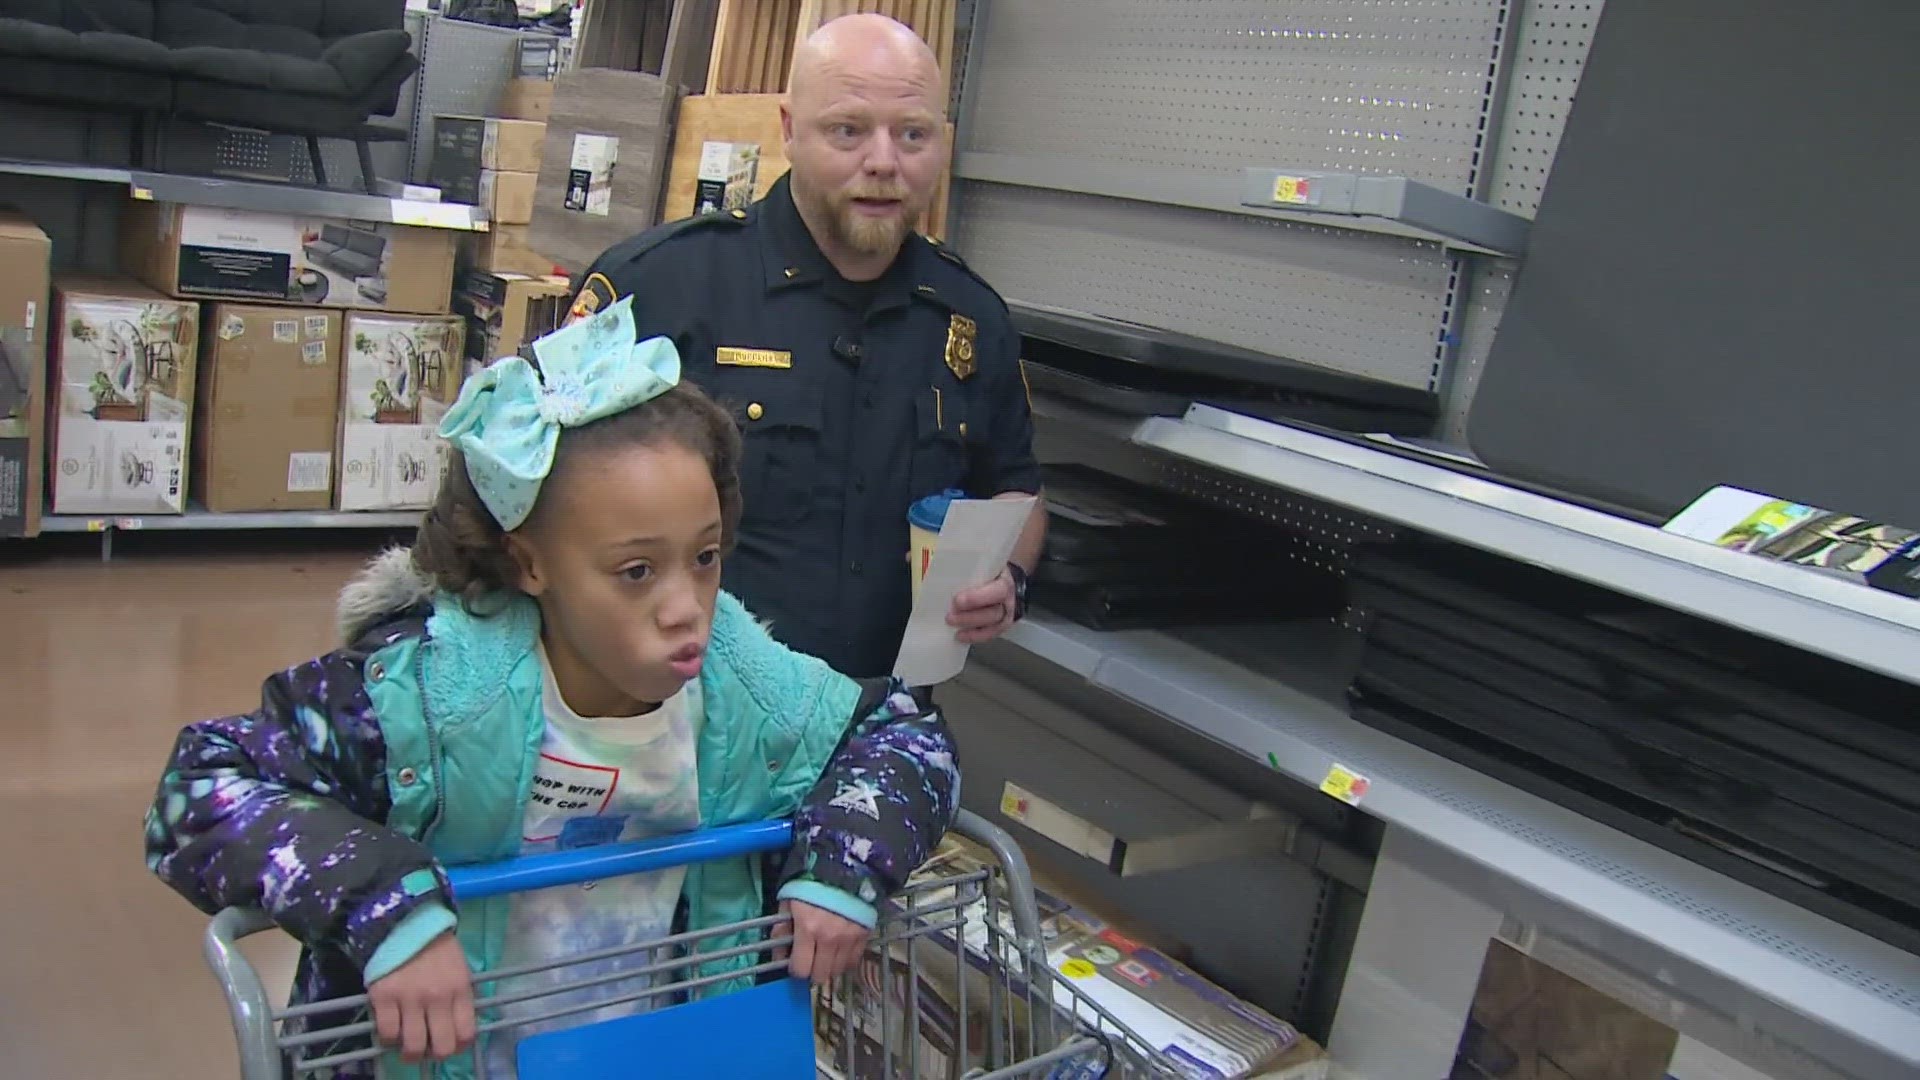 This year, Fort Worth PD are low on funds and need the public's help to make the shopping spree happen. They're hoping to raise $50,000.